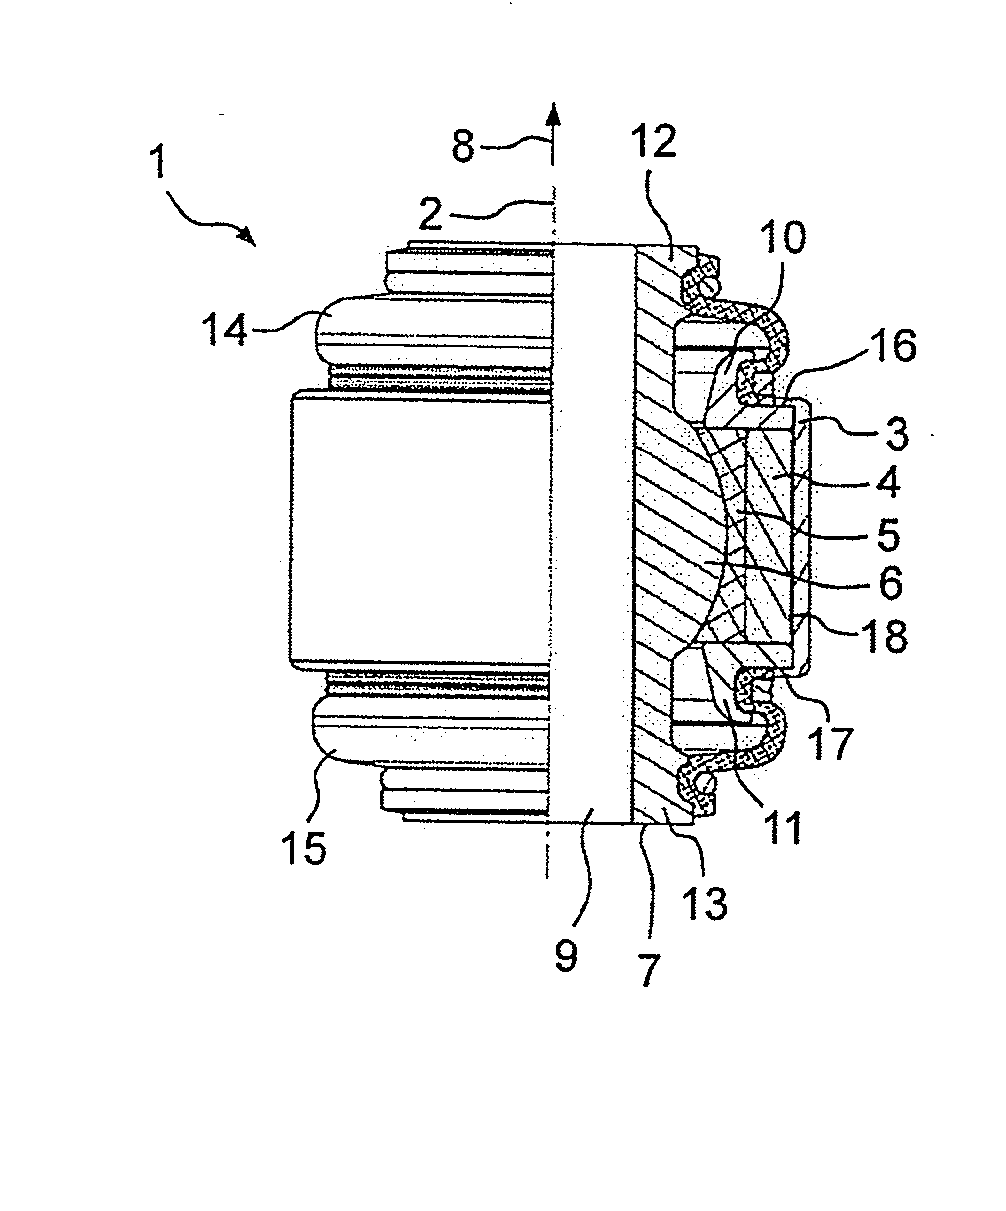 Cross-axis joint for a vehicle